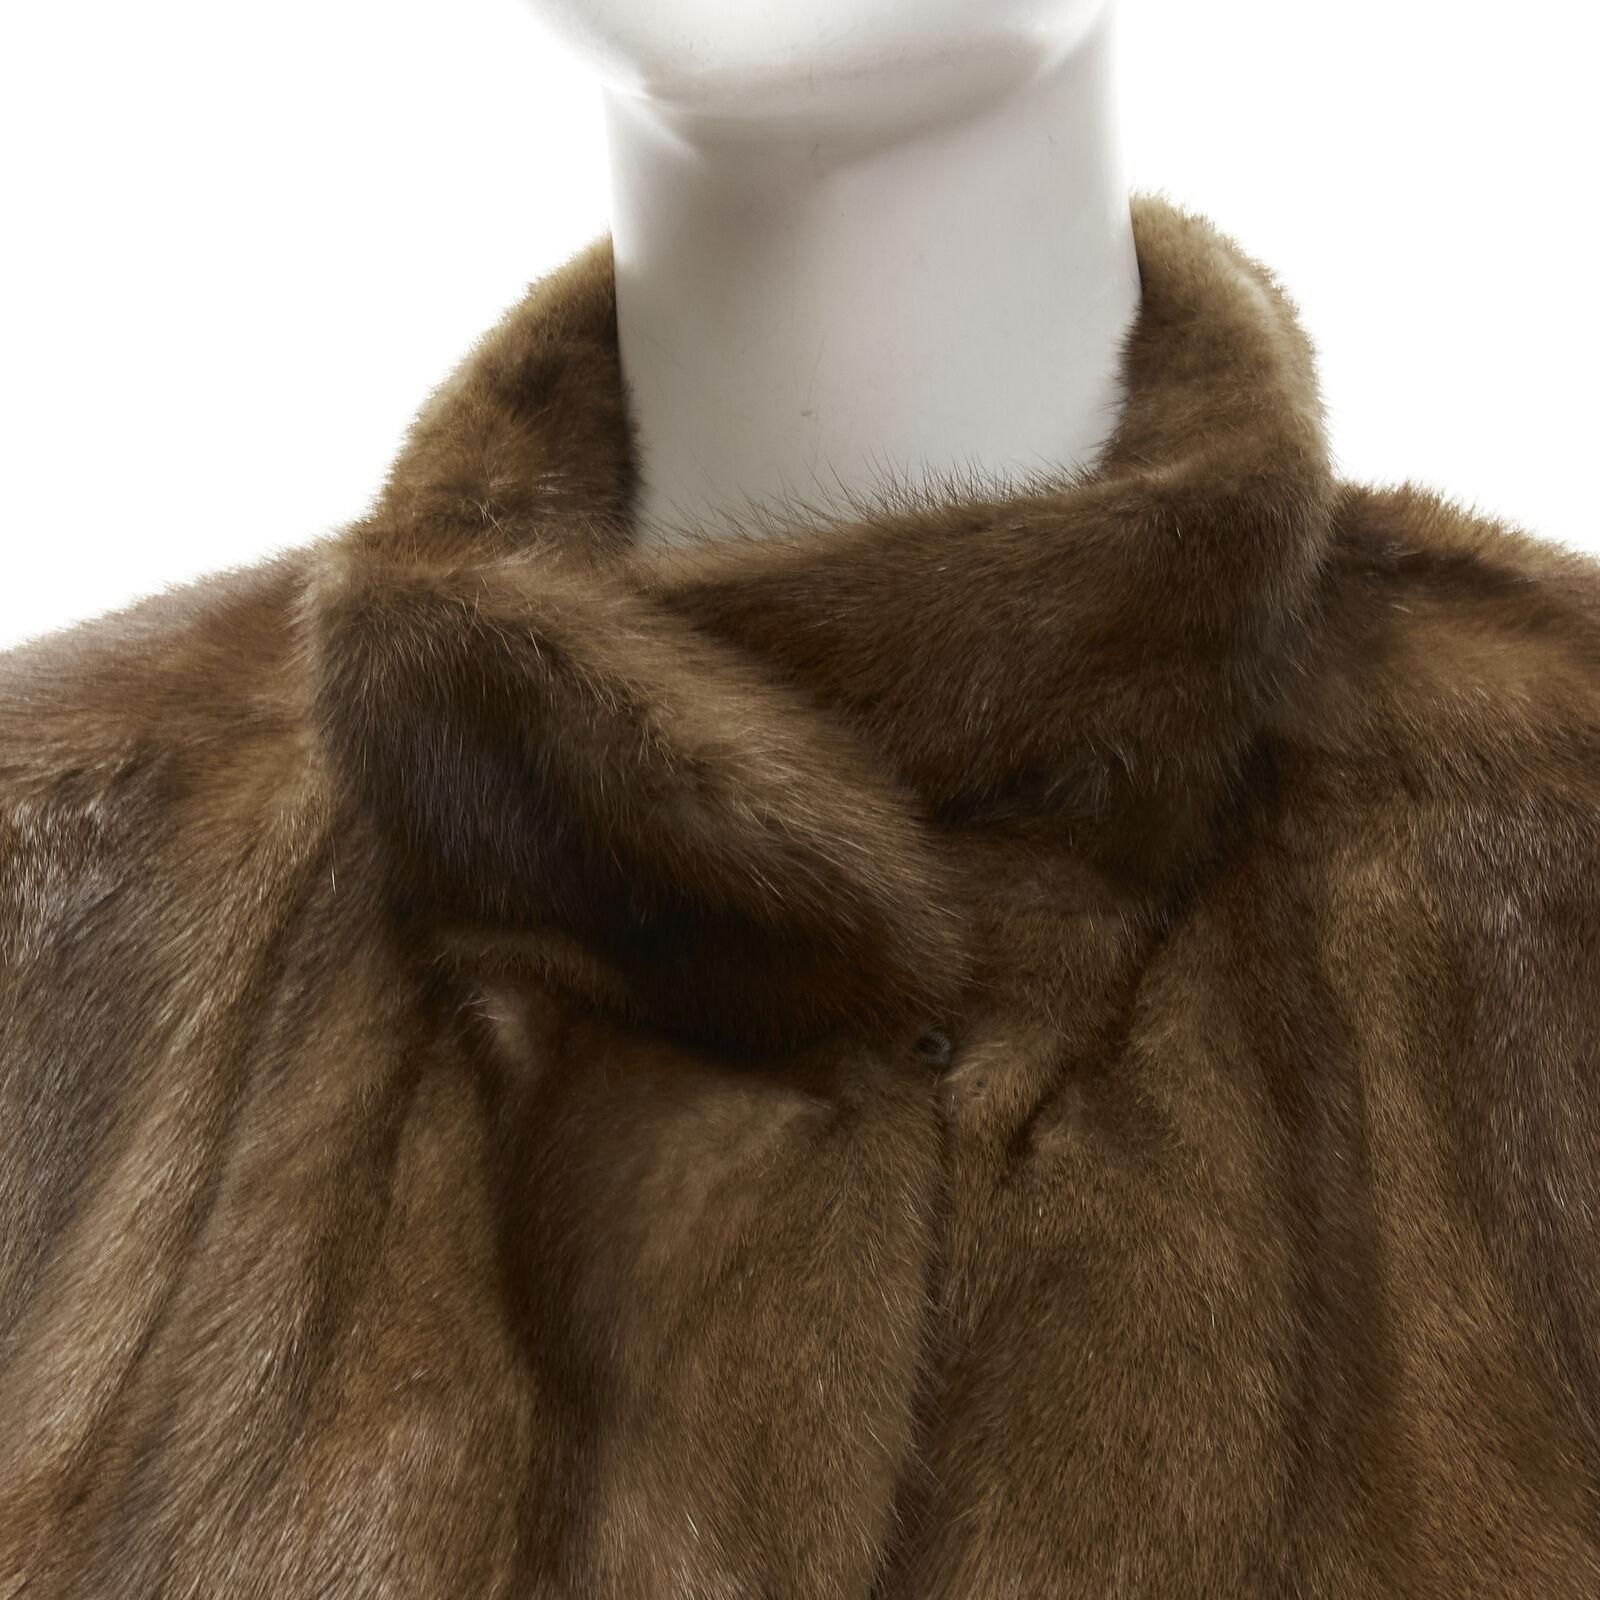 M JACQUES brown fur long sleeve collar jacket coat
Reference: ANWU/A00953
Brand: M Jacques
Material: Fur
Color: Brown
Pattern: Solid
Closure: Hook & Eye
Lining: Fabric

CONDITION:
Condition: Excellent, this item was pre-owned and is in excellent